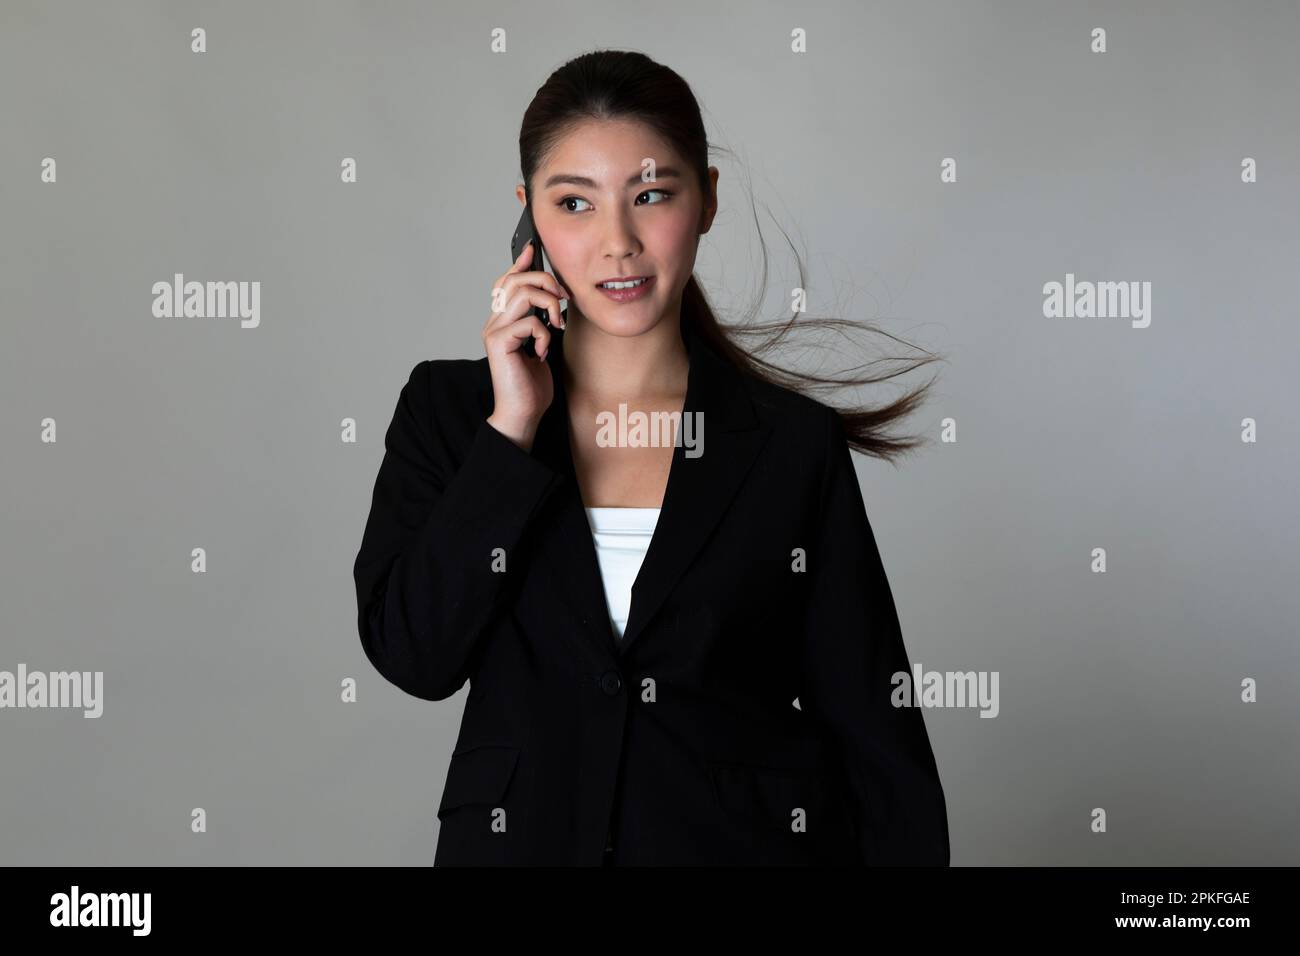 Portrait of Woman in Suit Stock Photo